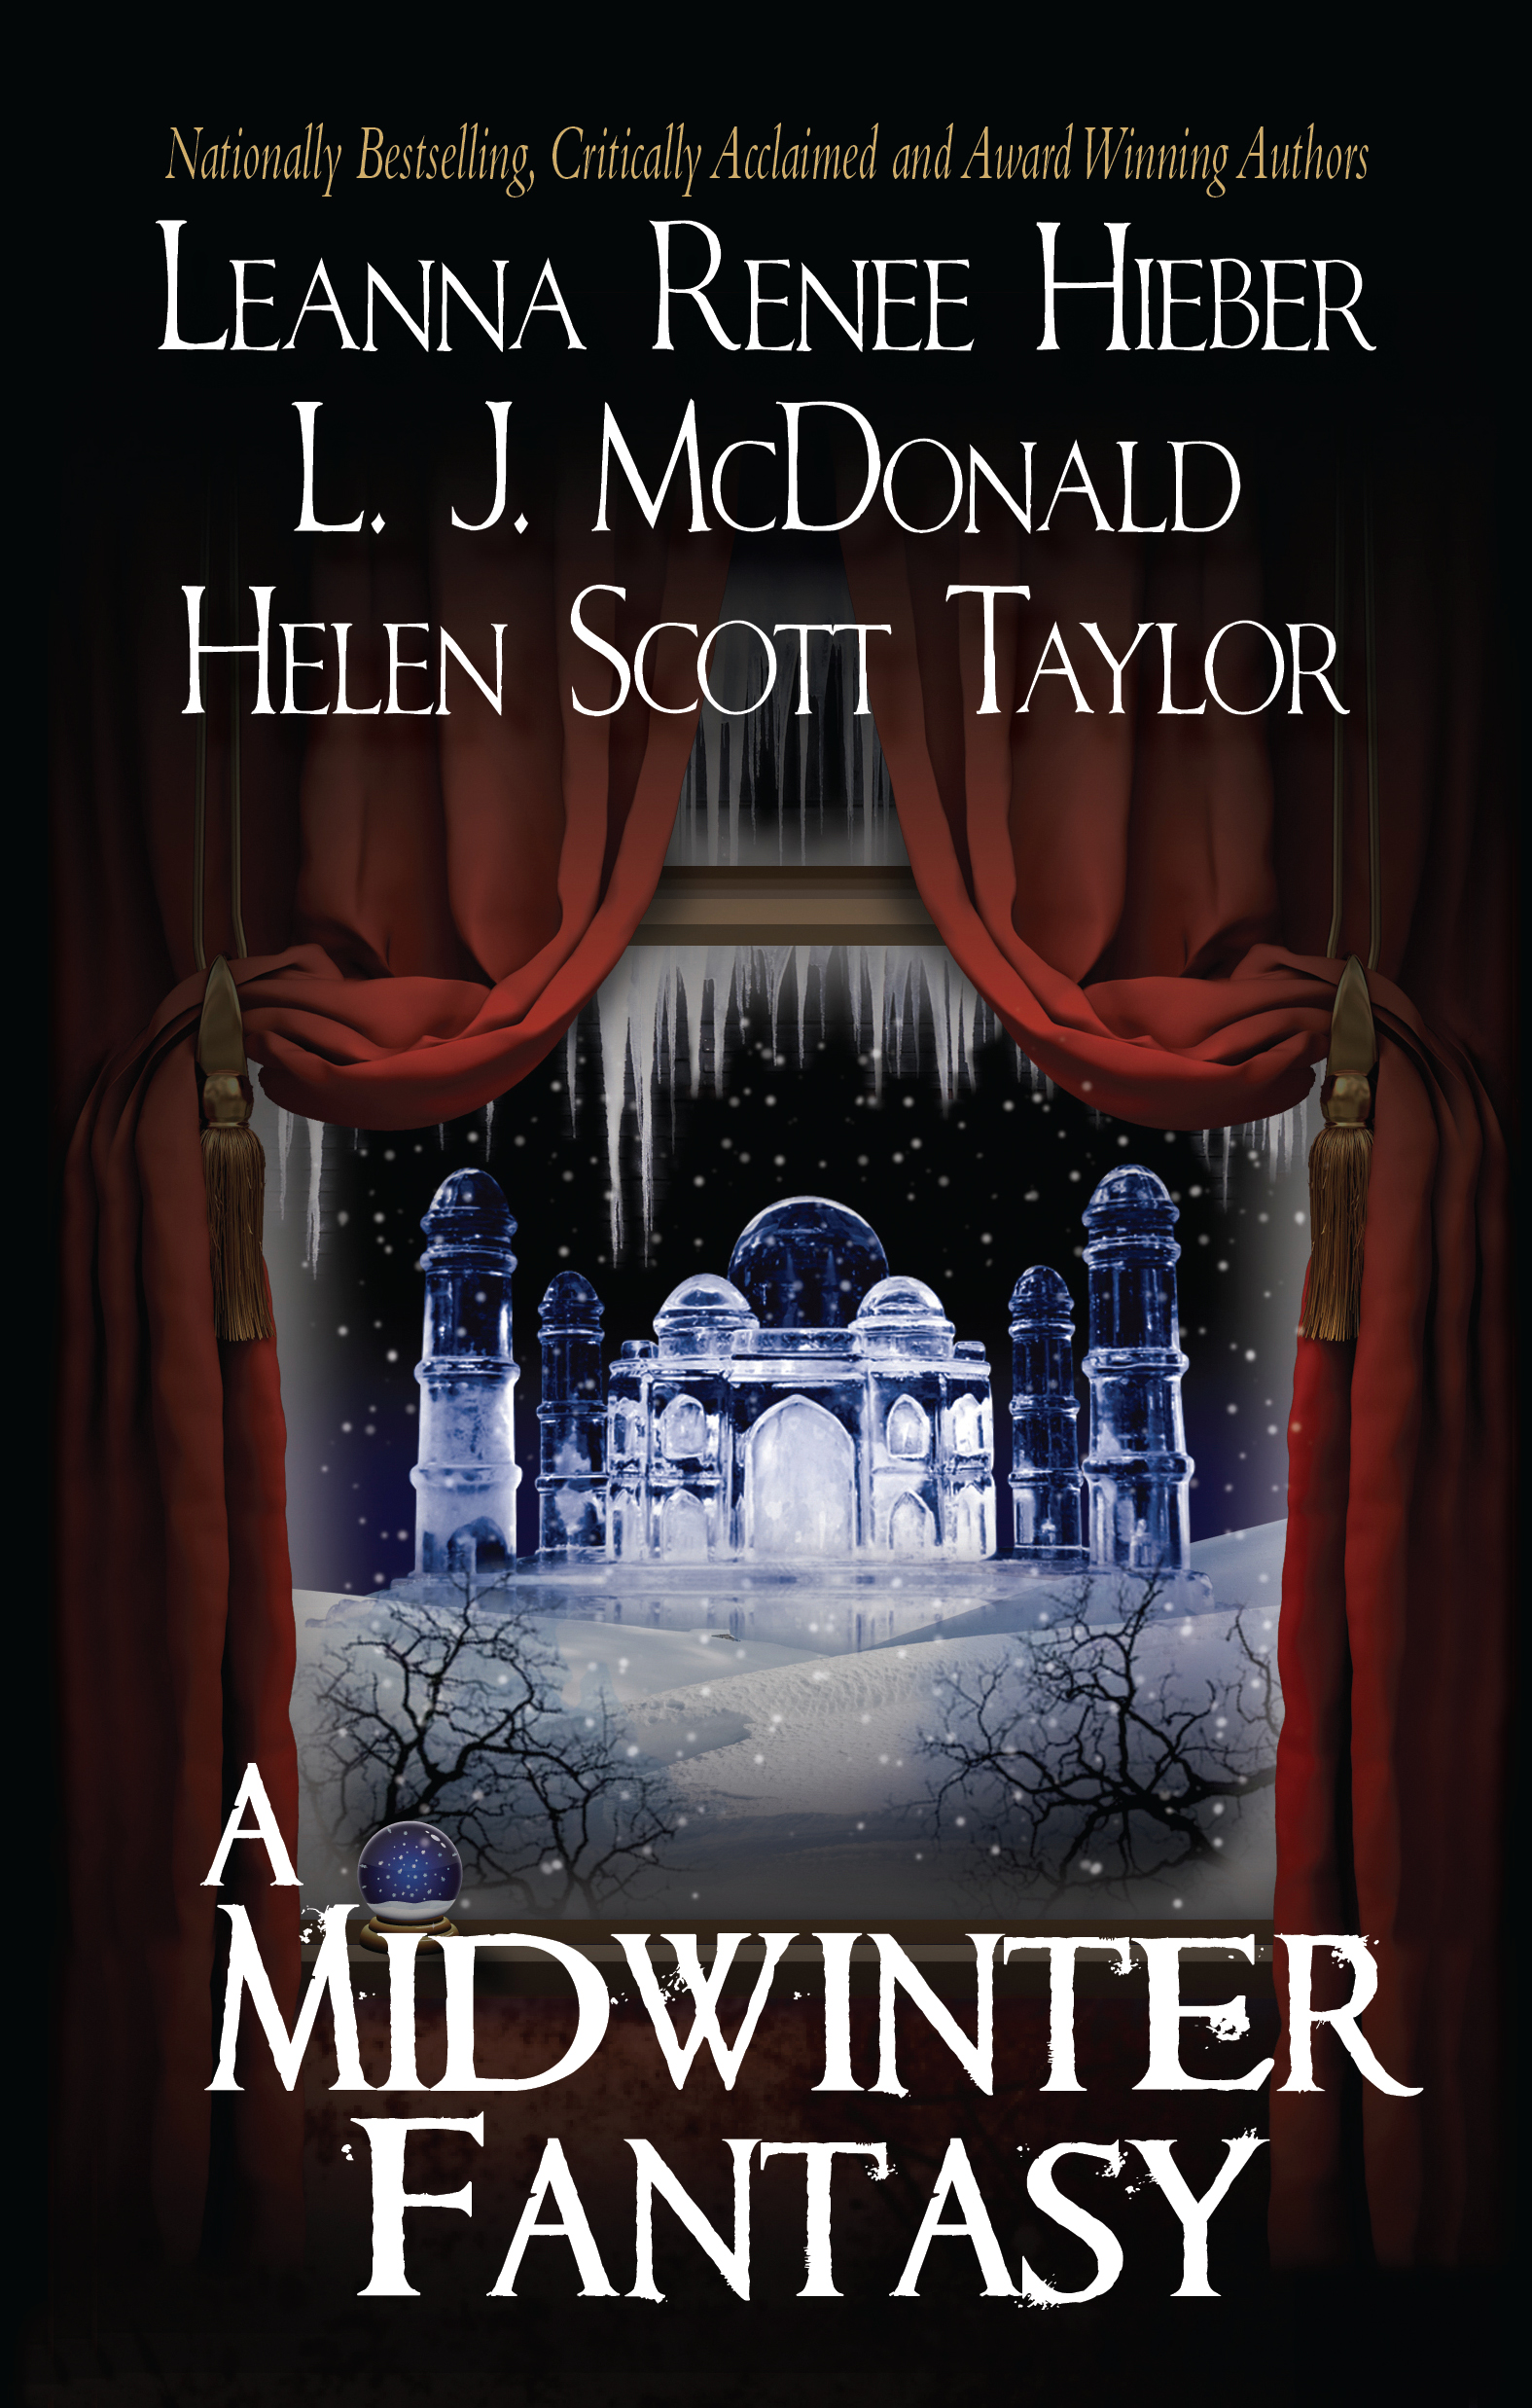 A Midwinter Fantasy (2010) by Leanna Renee Hieber